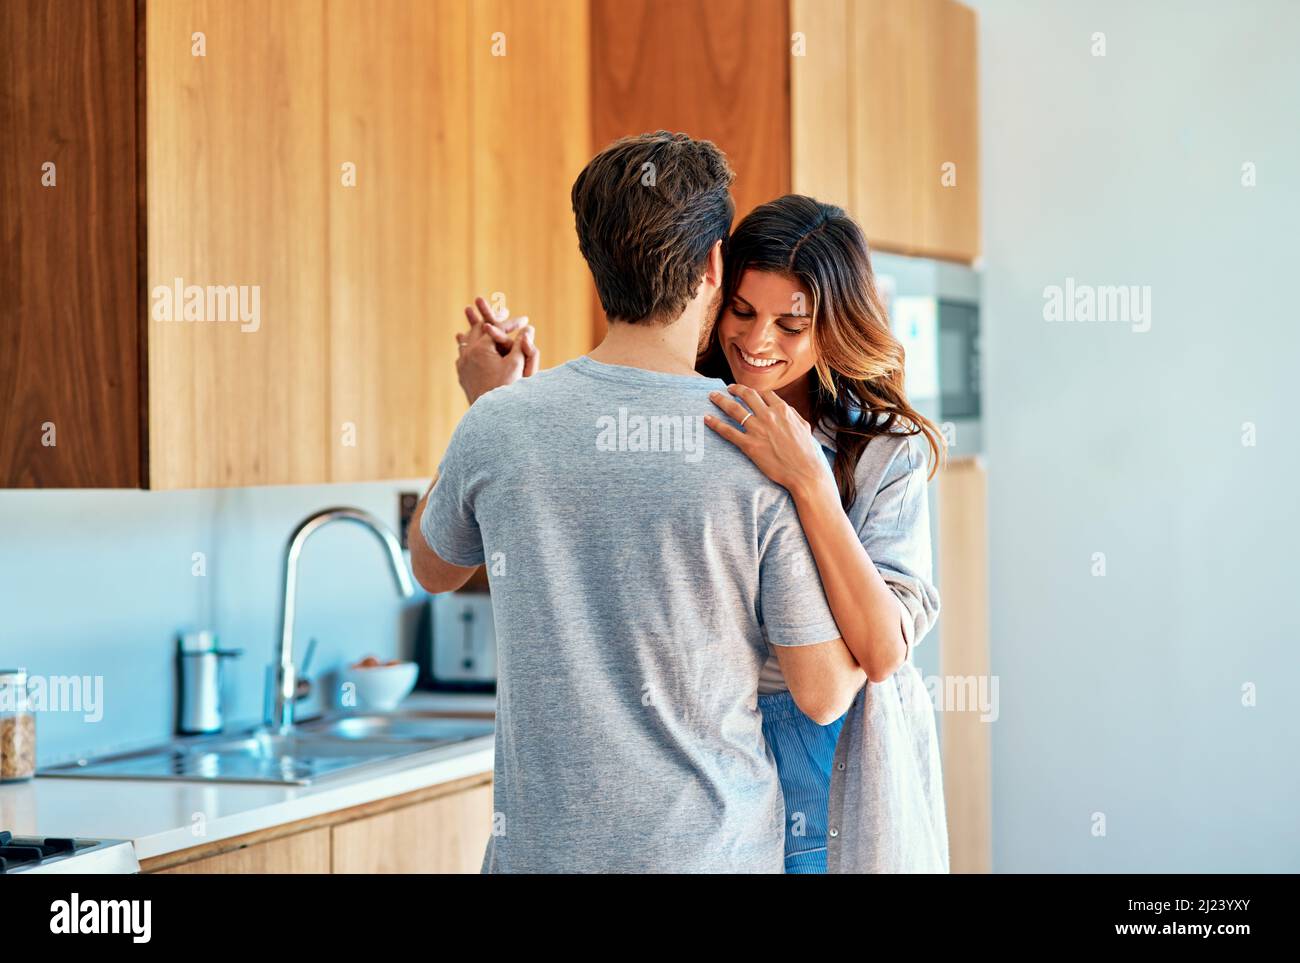 Theyve got that bond that warms all emotion. Shot of an affectionate young couple dancing together at home. Stock Photo